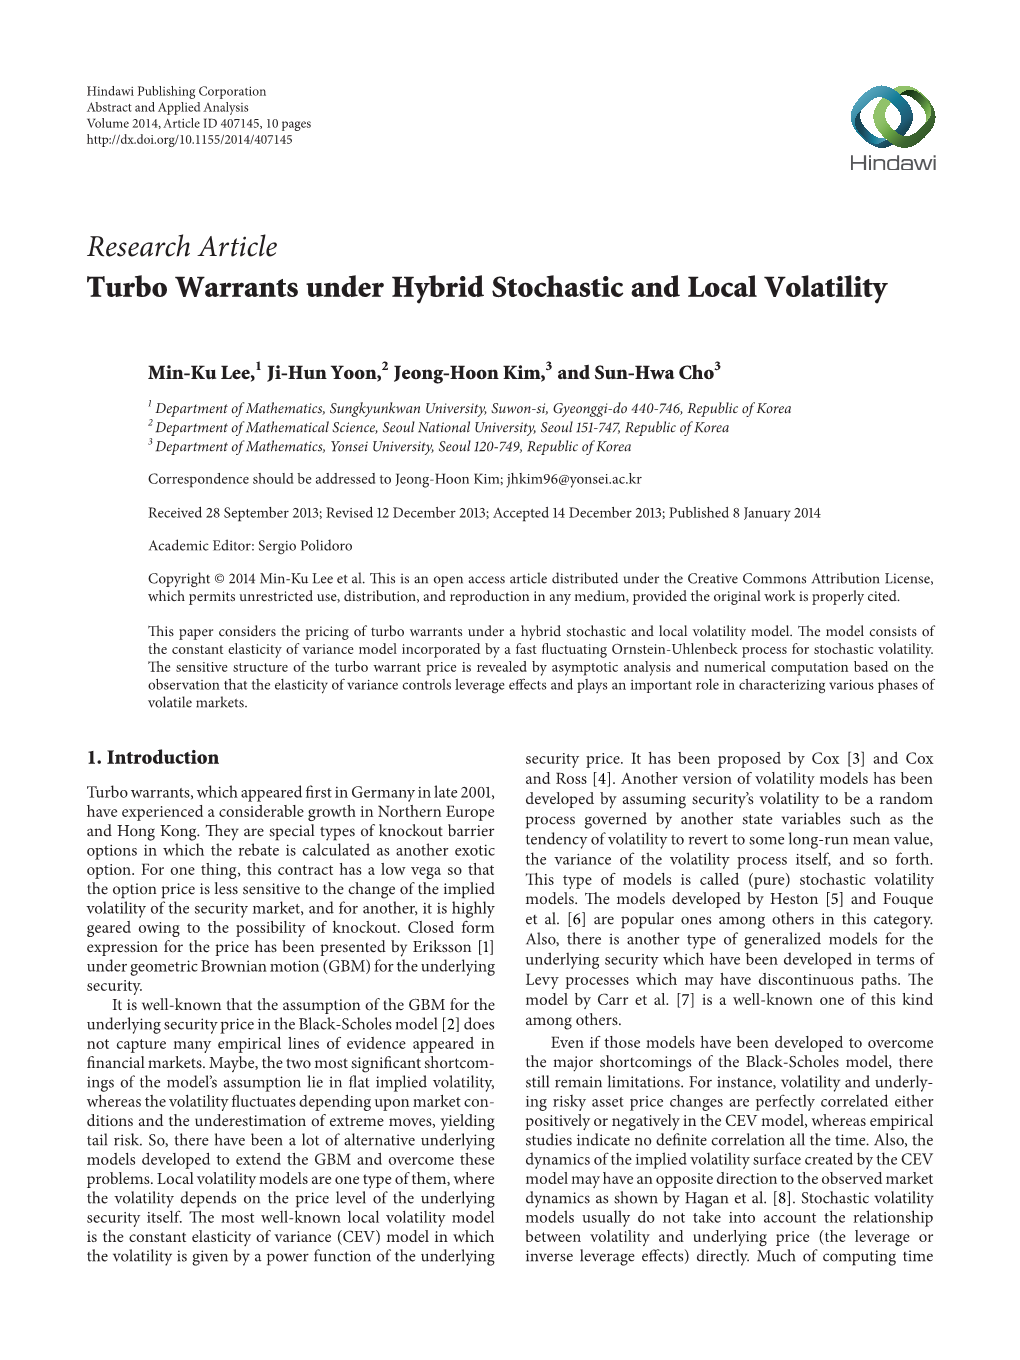 Research Article Turbo Warrants Under Hybrid Stochastic and Local Volatility